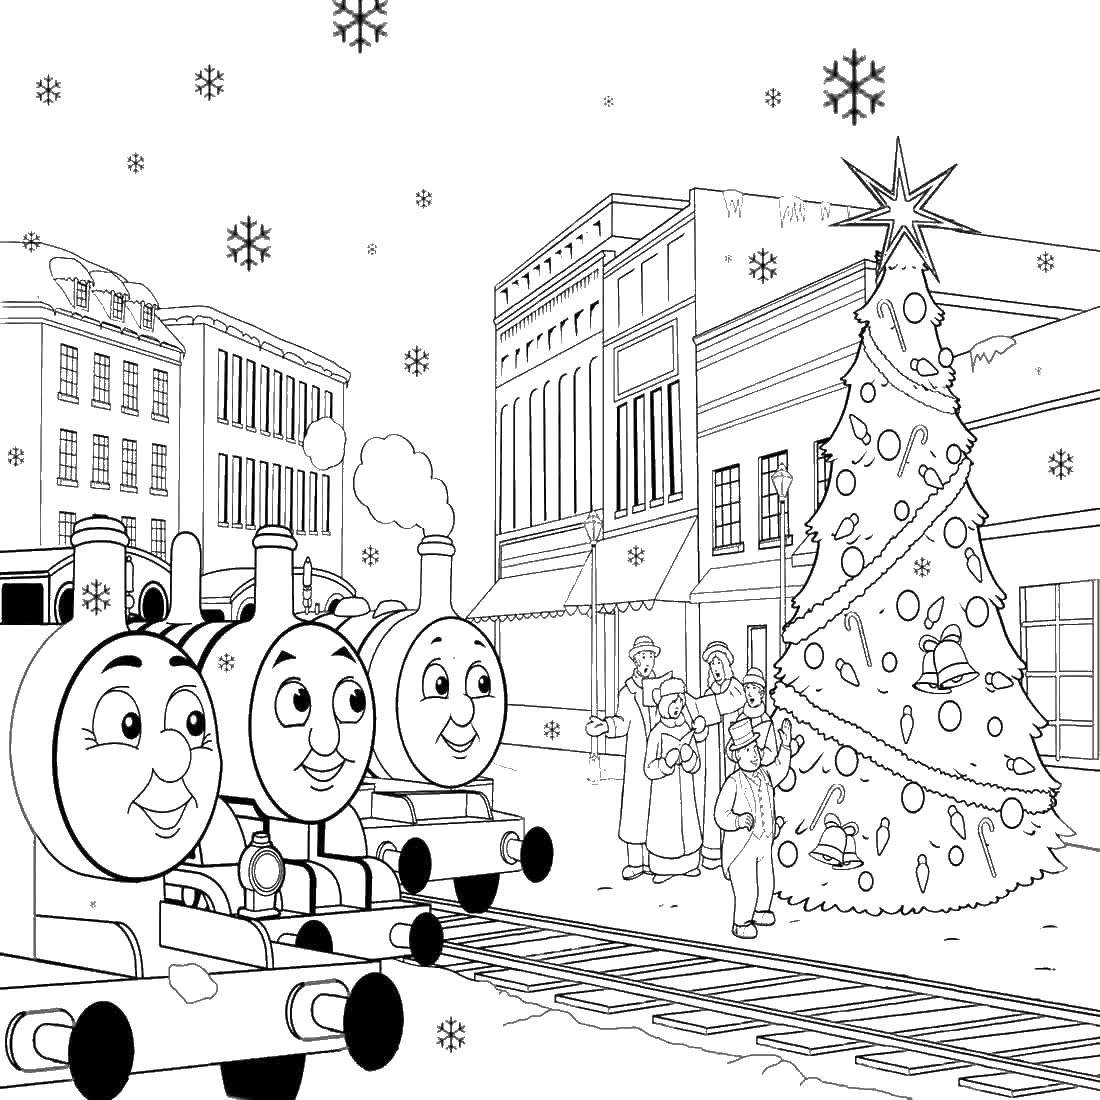 Coloring Christmas in the city. Category Christmas. Tags:  tree, locomotive, people.